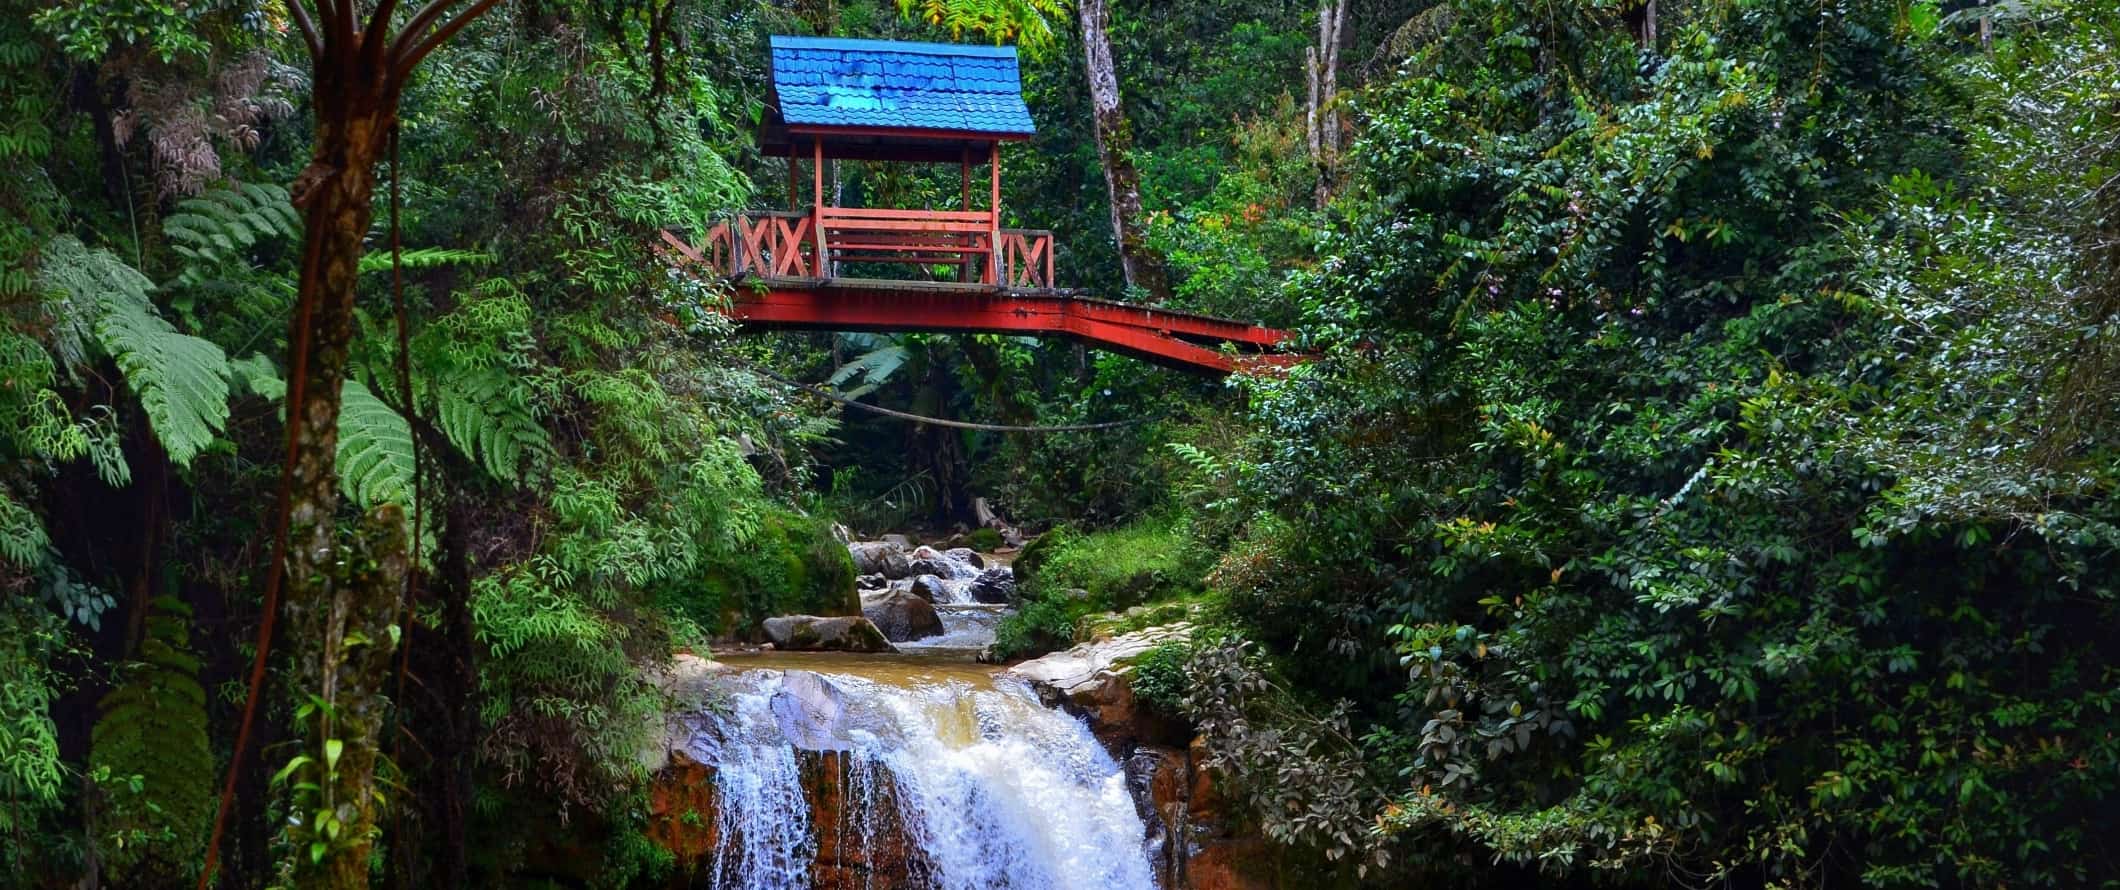 A red bridge crossing a river in the jungles of Cameron Highlands, Malaysia